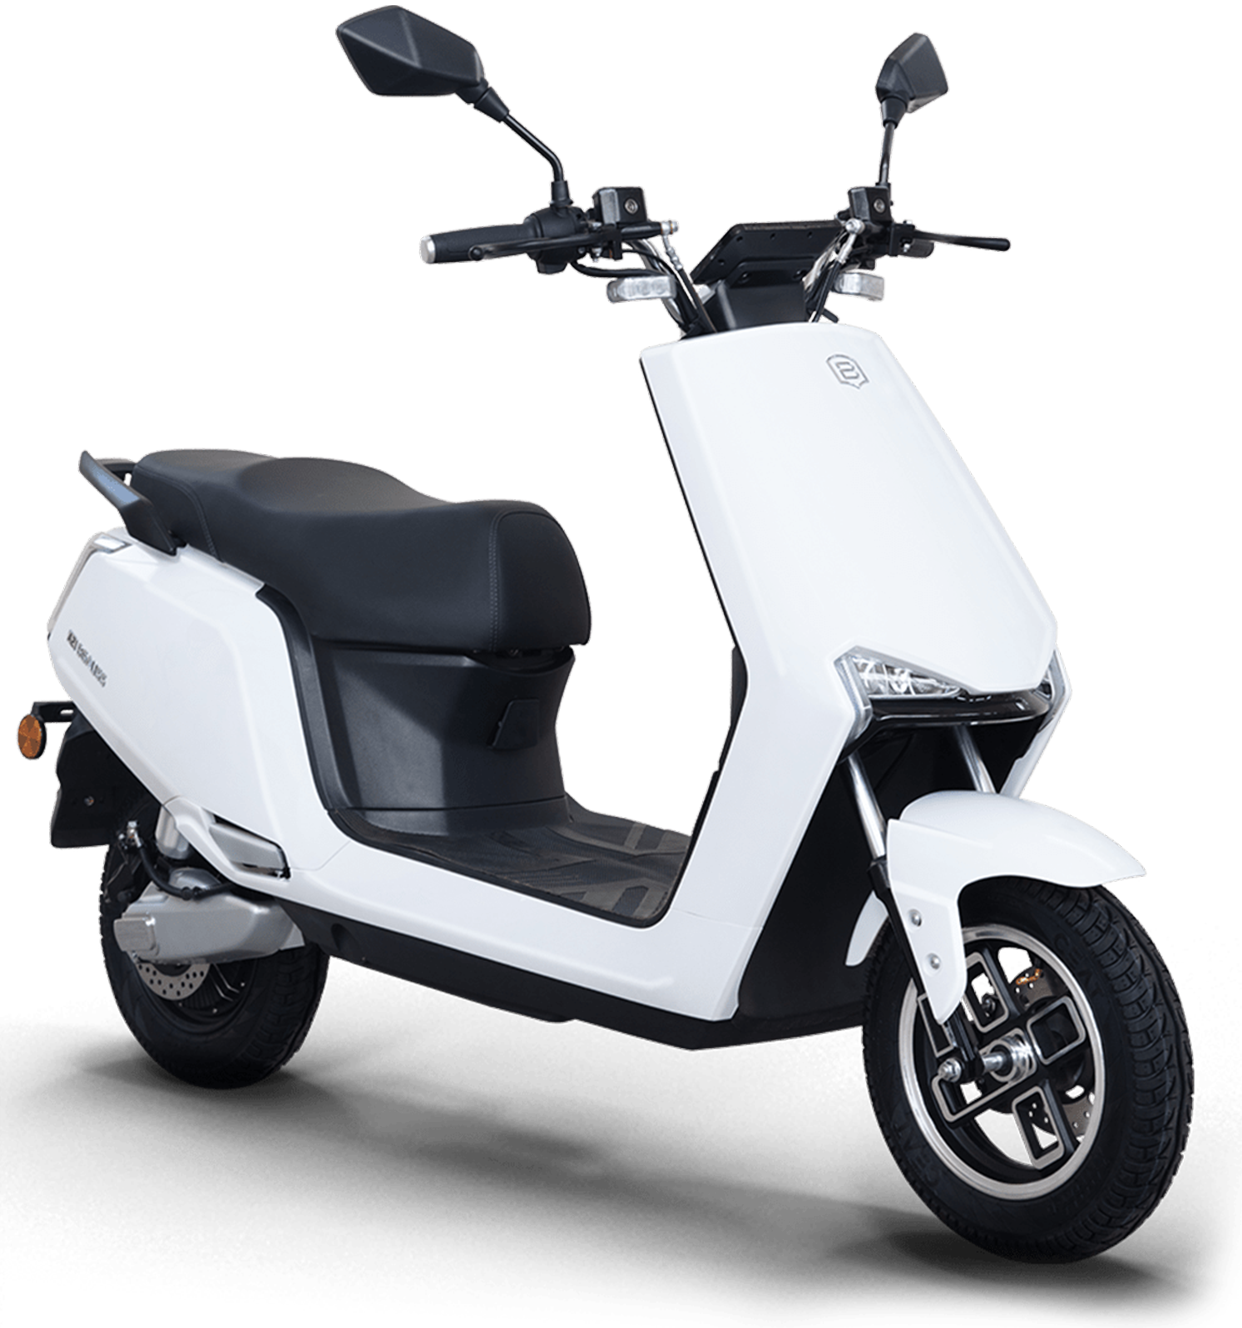 https://e-vehicleinfo.com/bgauss-a2-low-speed-electric-scooter-price-range-features/